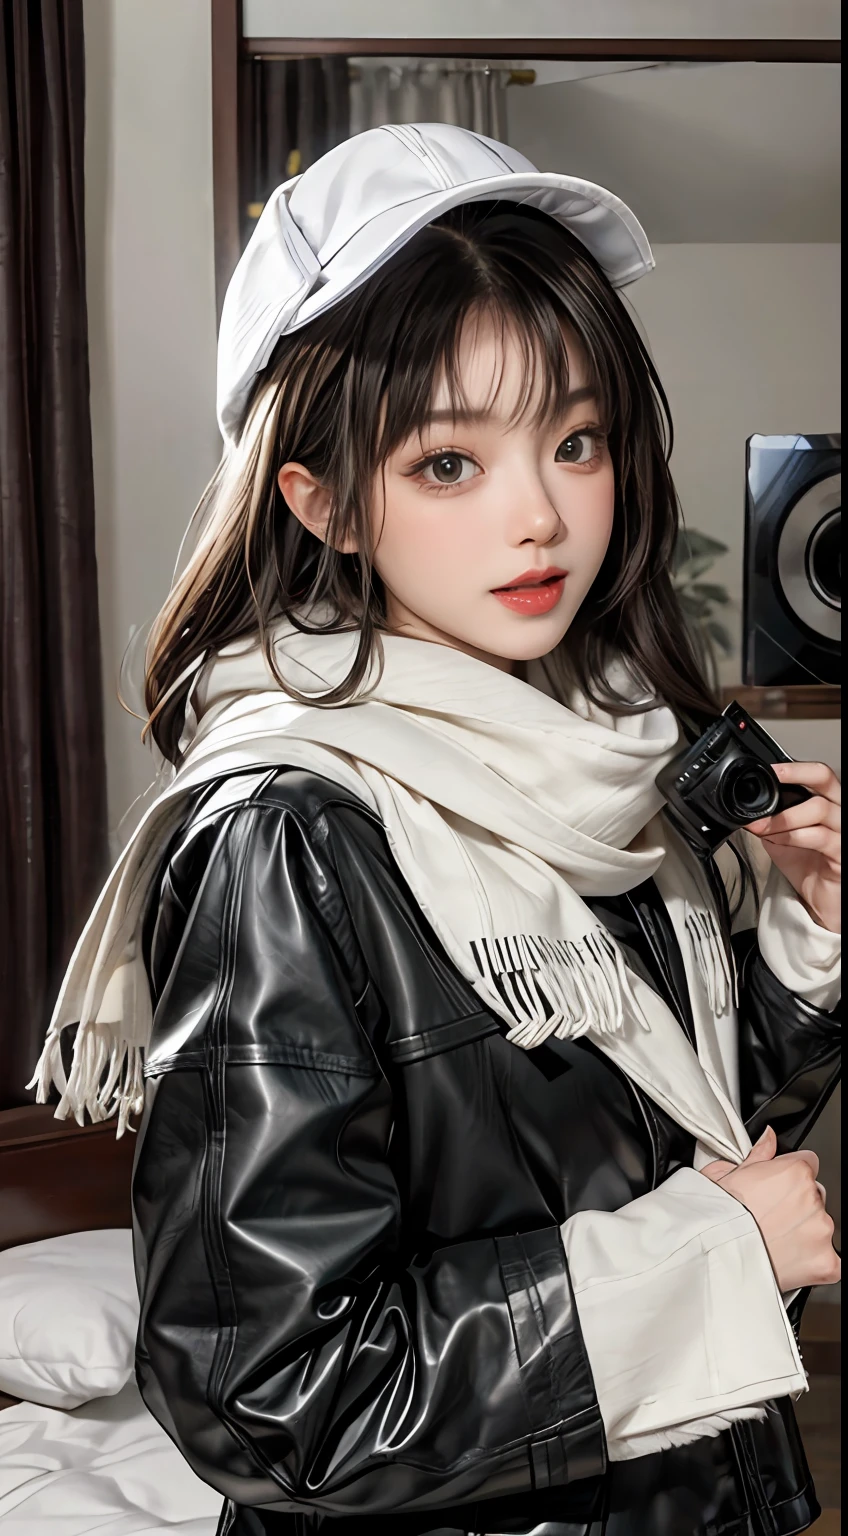 tmasterpiece， Best quality at best， 1 girl， solo， brunette color hair， scarf， Hats， Realiy， Mirrorless camera， 黑The eye， long whitr hair， cloak， winter clothes， White scarf， White teeth with open mouths， cparted lips， By bangs， inside in room， on bedroom，